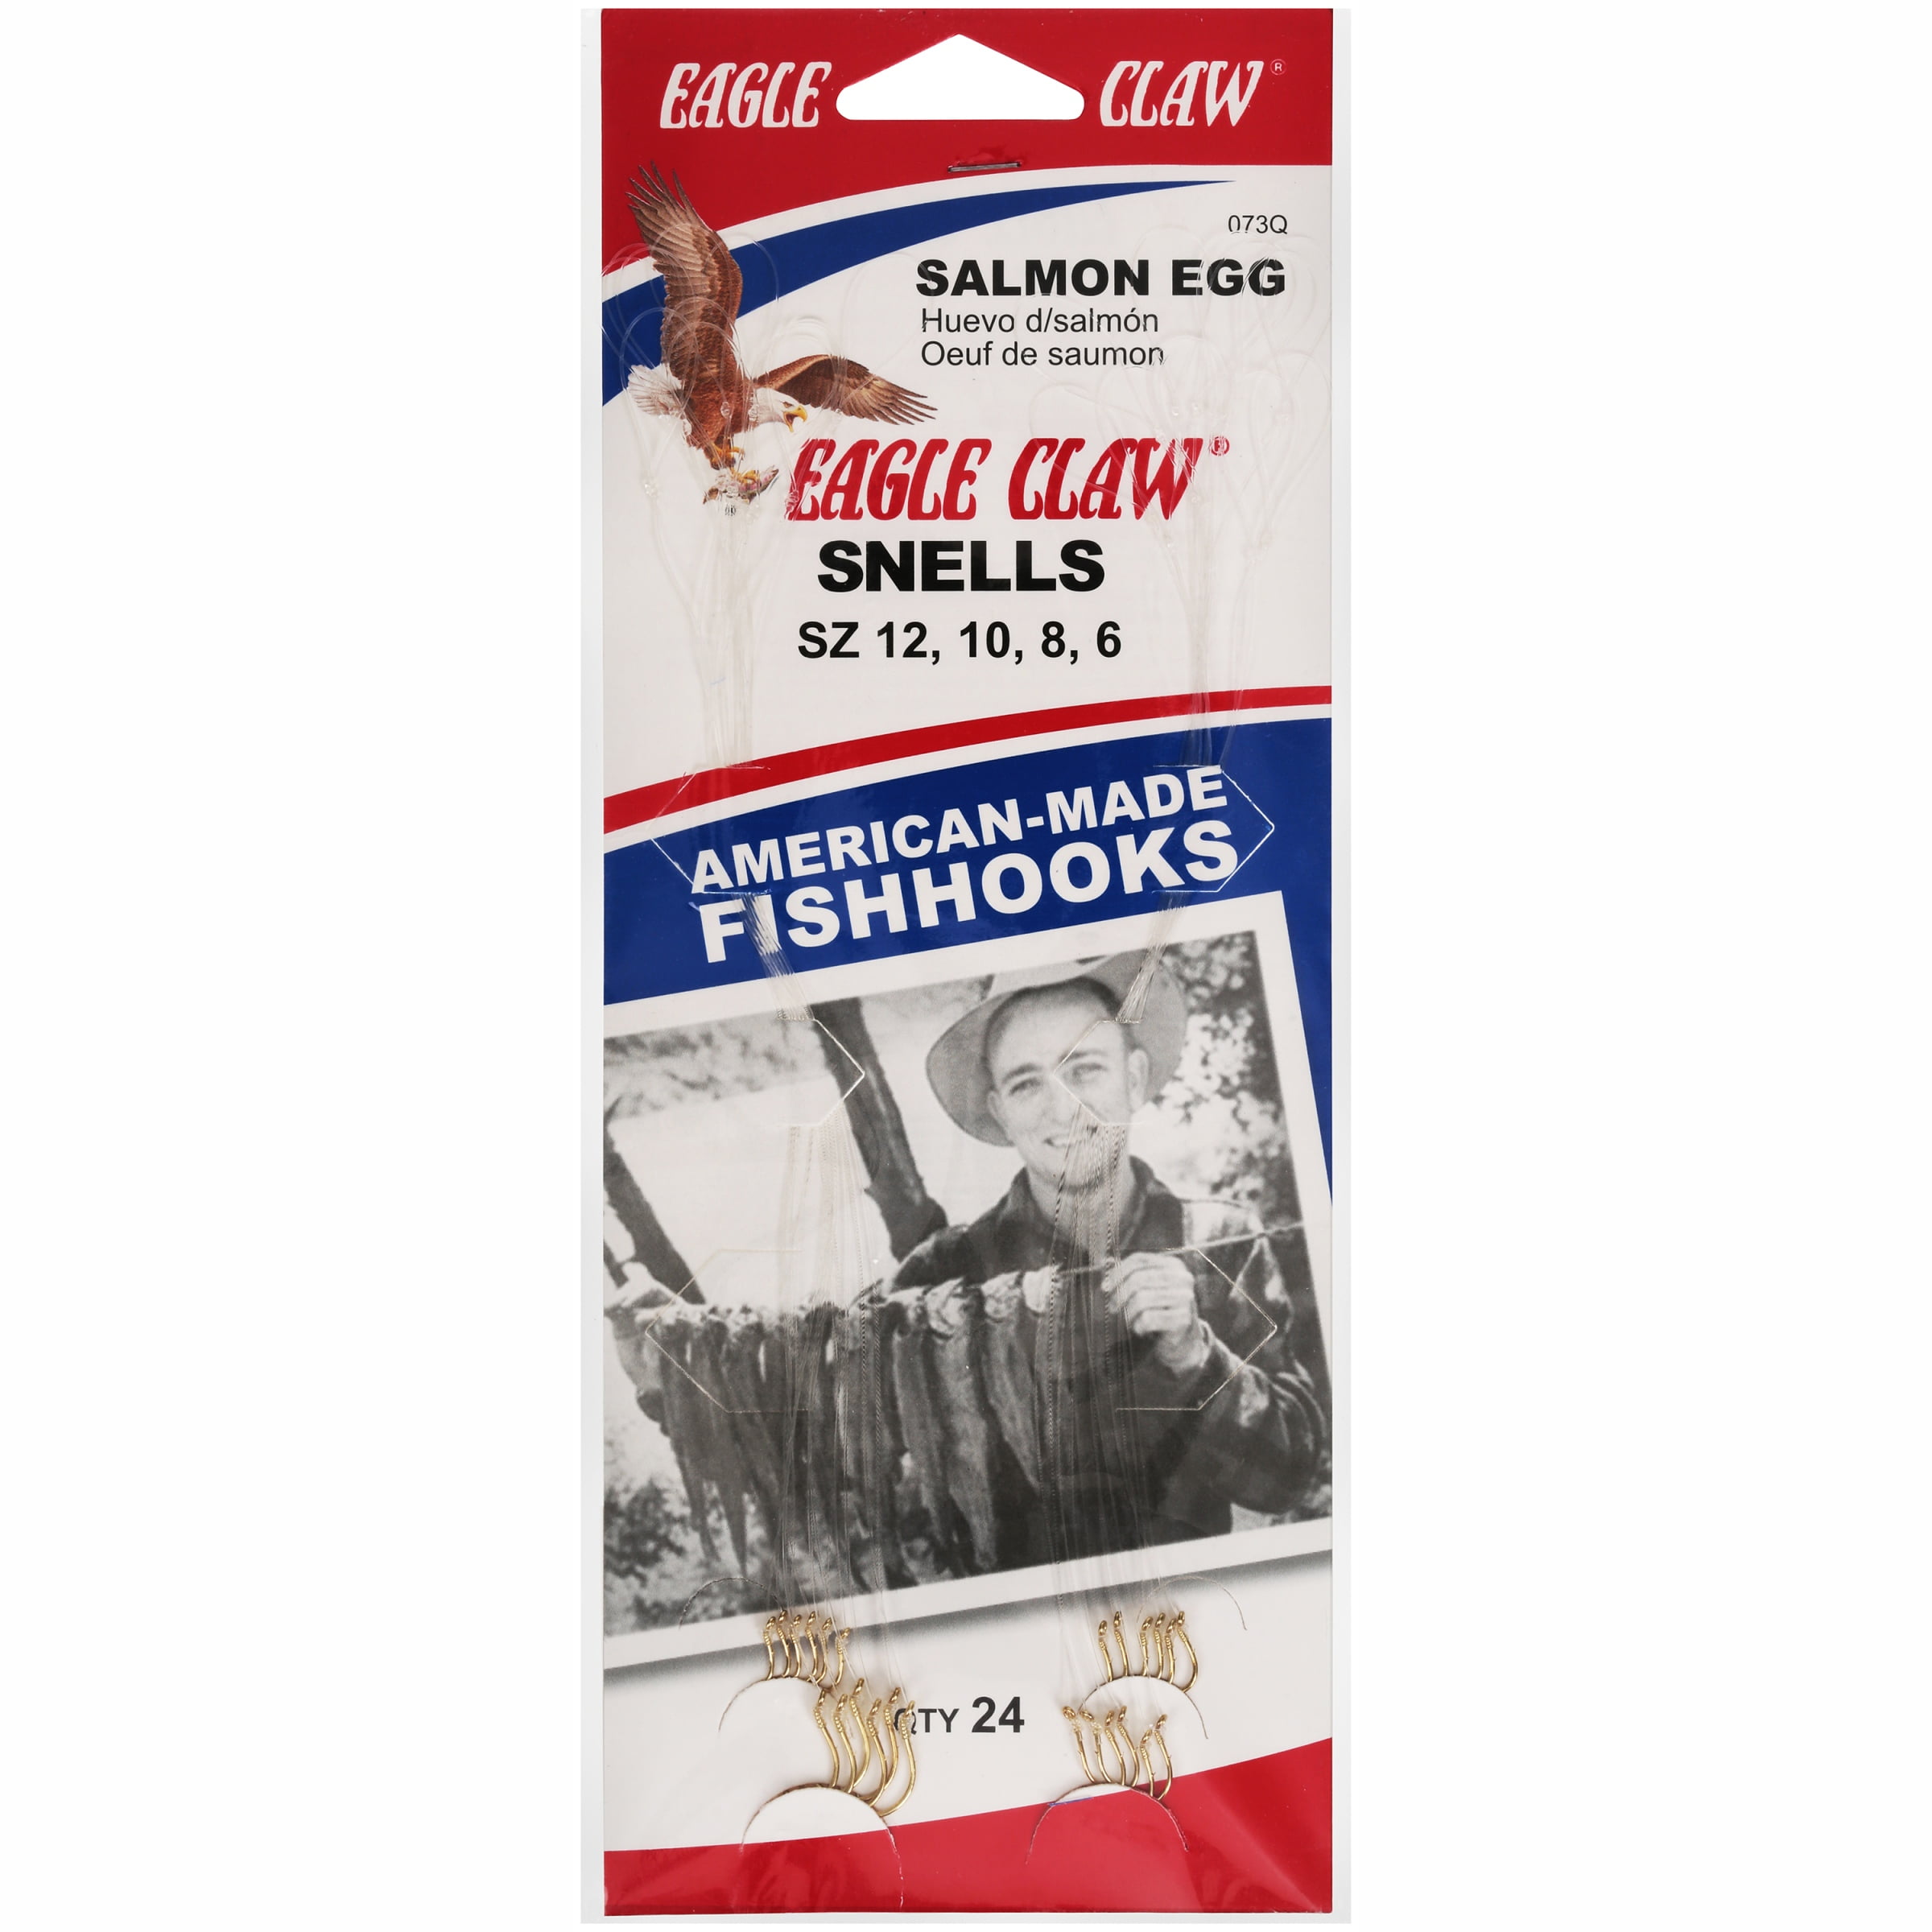 4 Packs Eagle Claw Snell Style 031 Size 4 Snelled Hooks 24 Hooks